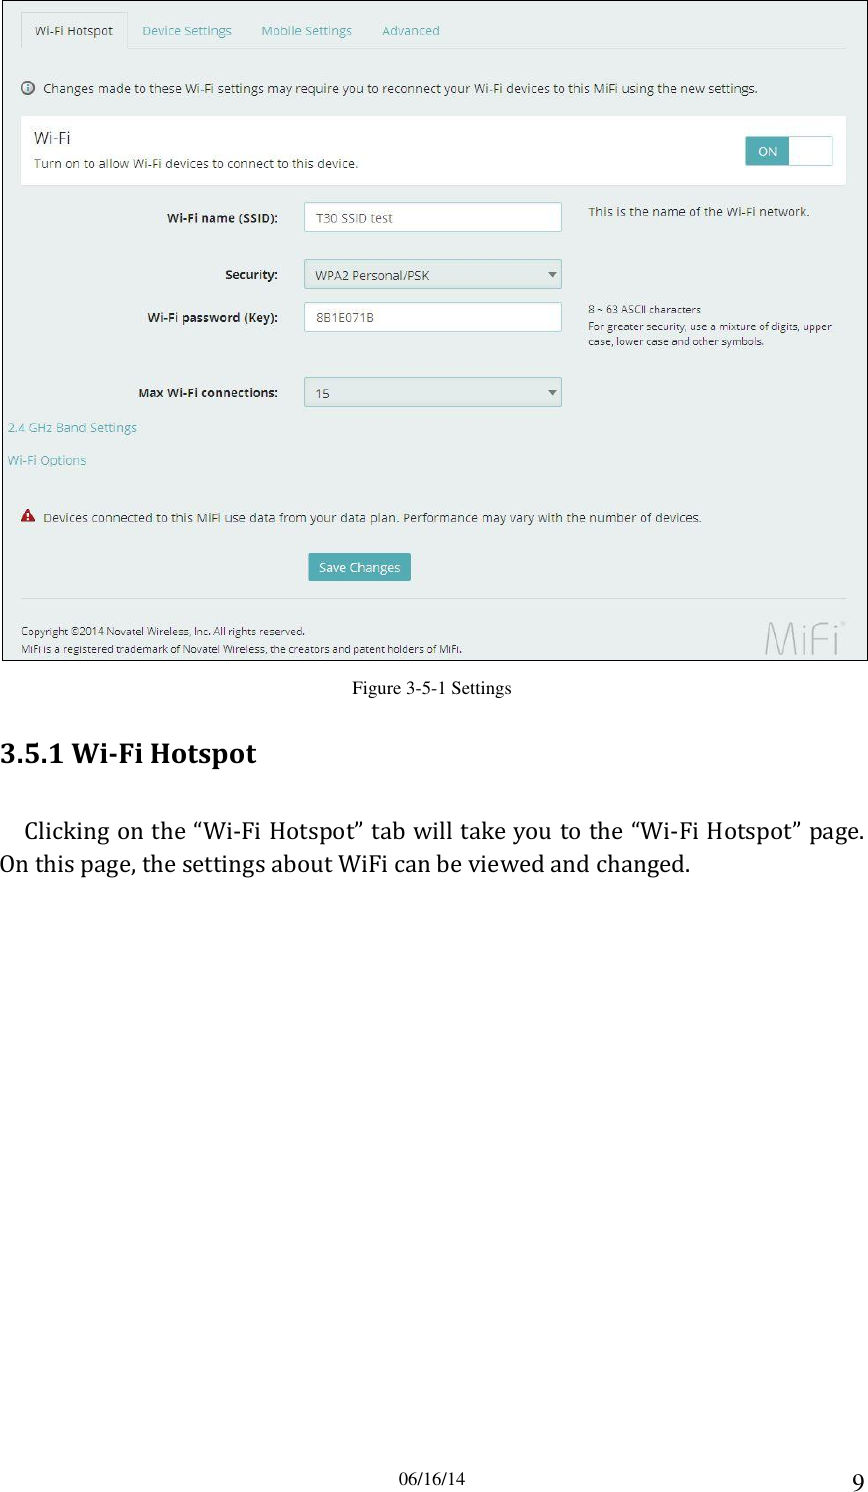 06/16/14 9  Figure 3-5-1 Settings 3.5.1 Wi-Fi Hotspot Clicking on the “Wi-Fi Hotspot” tab will take you to the “Wi-Fi Hotspot” page. On this page, the settings about WiFi can be viewed and changed. 